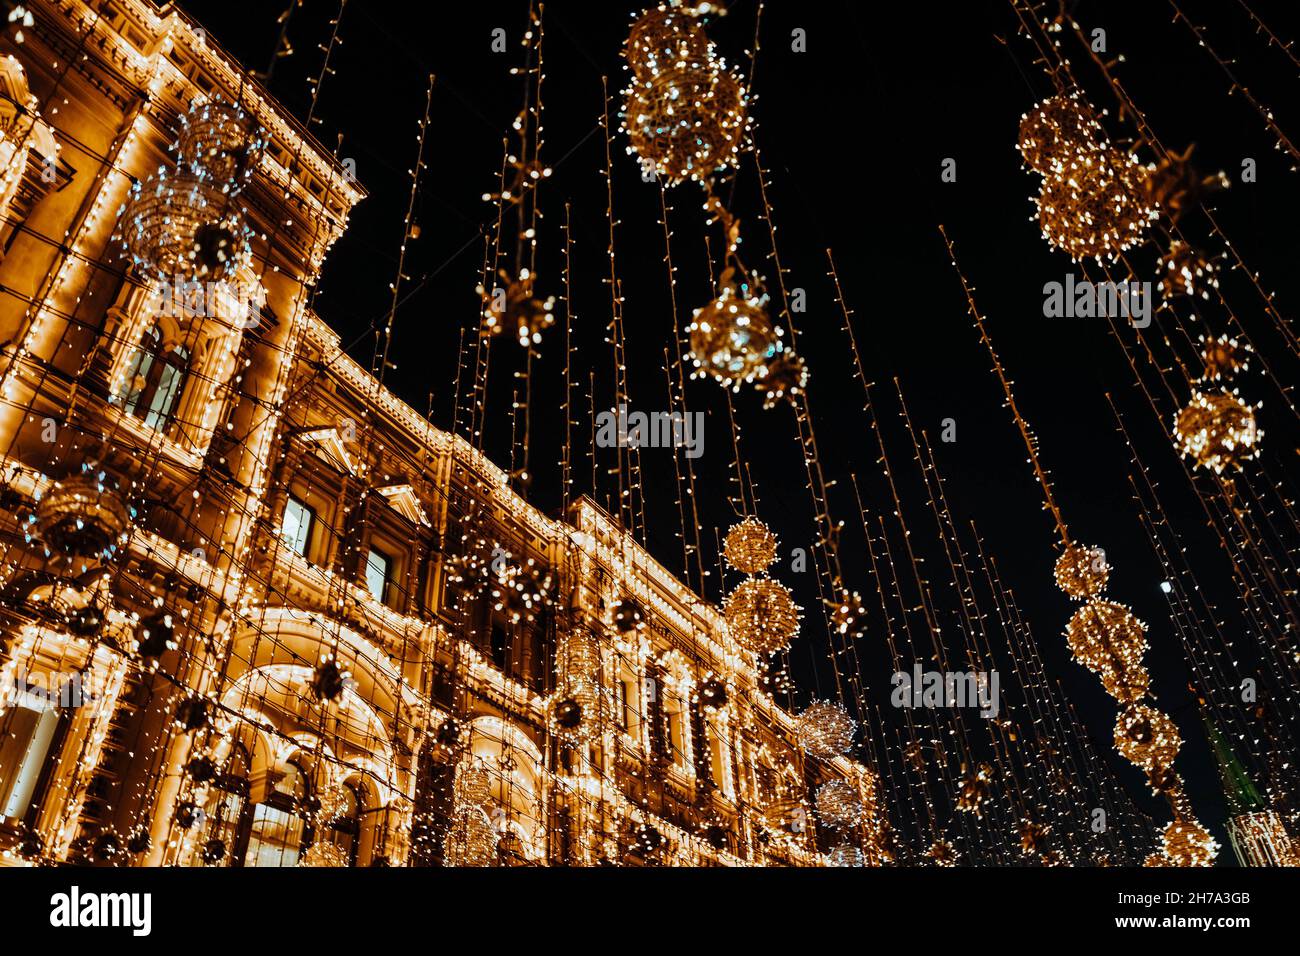 Vintage building decorated with golden glittering festive garlands. Christmas and New Year in the evening city Stock Photo